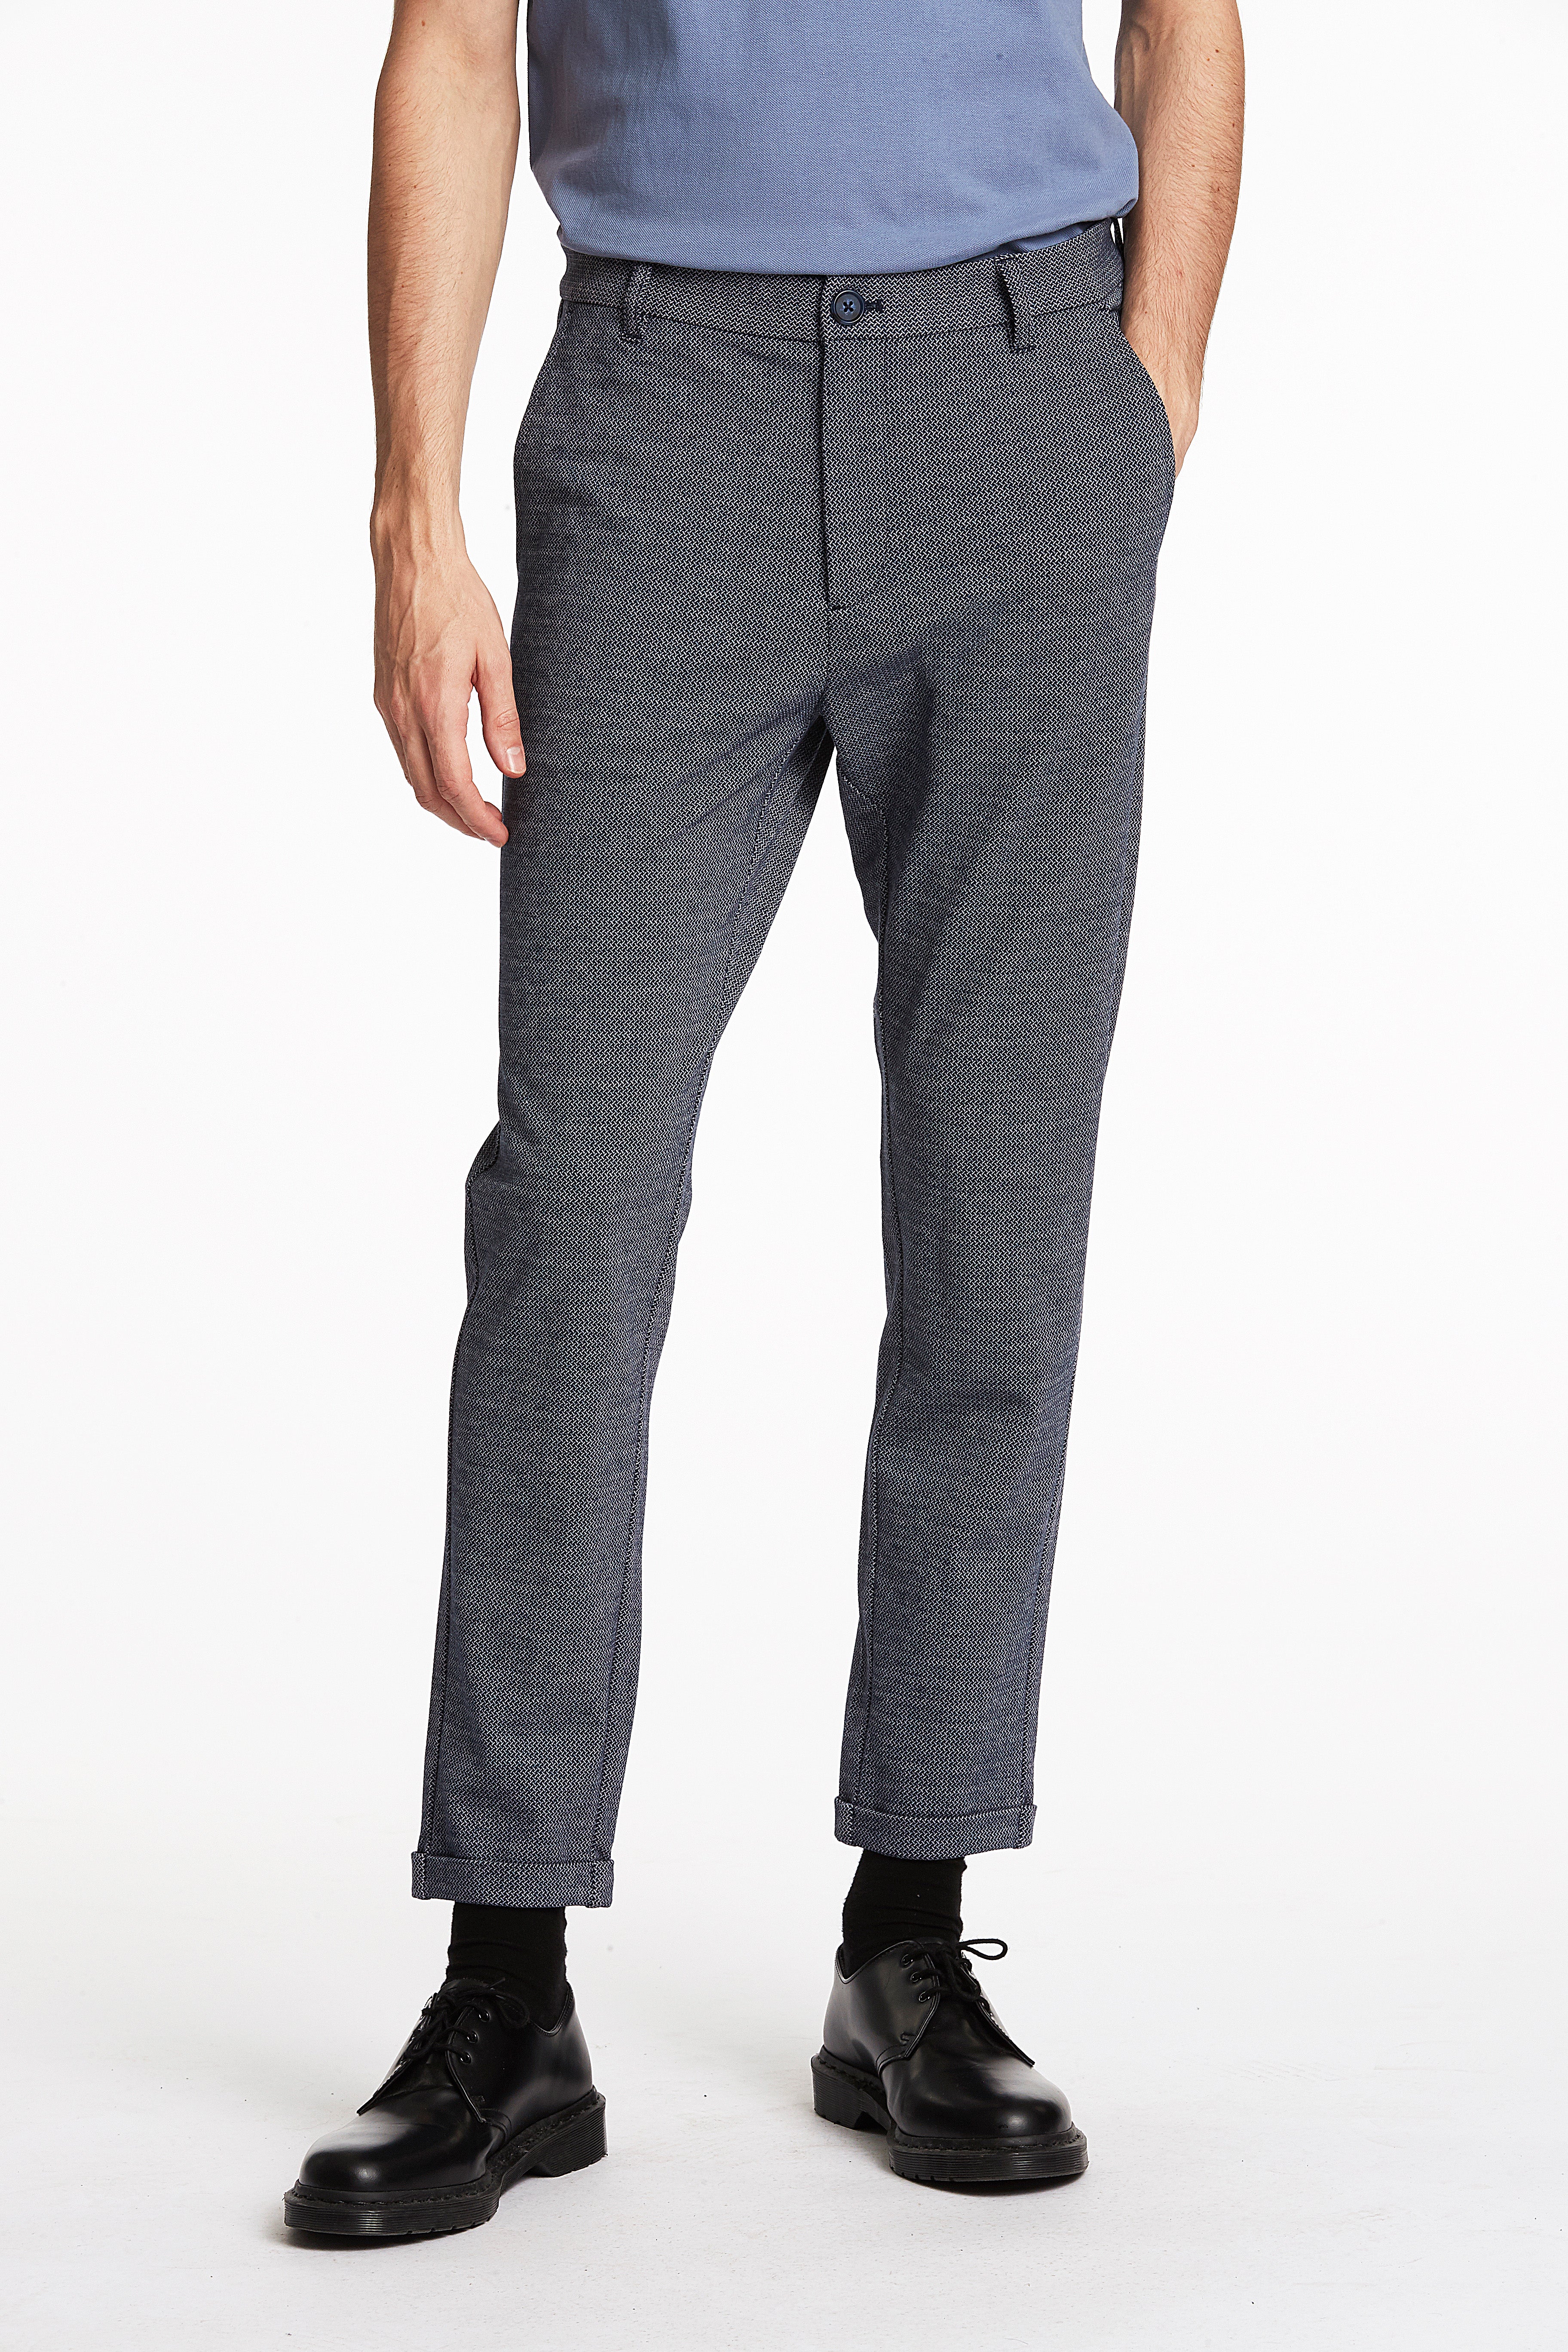 Buy Arrow Solid Twill Wool Blend Trousers - NNNOW.com